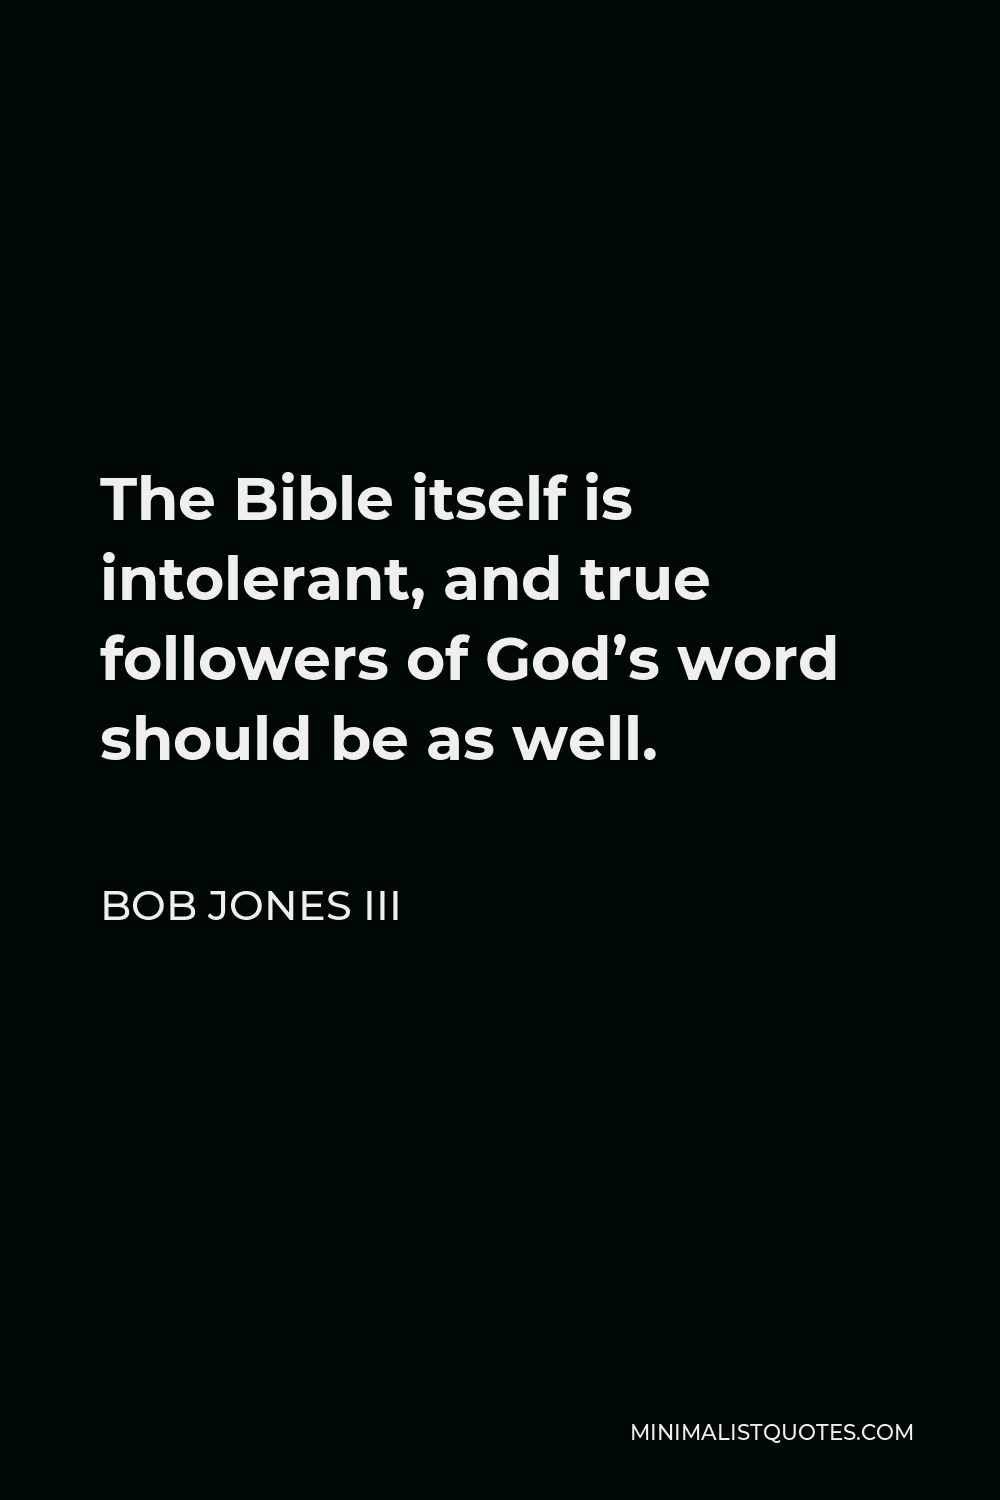 Bob Jones III Quote - The Bible itself is intolerant, and true followers of God’s word should be as well.